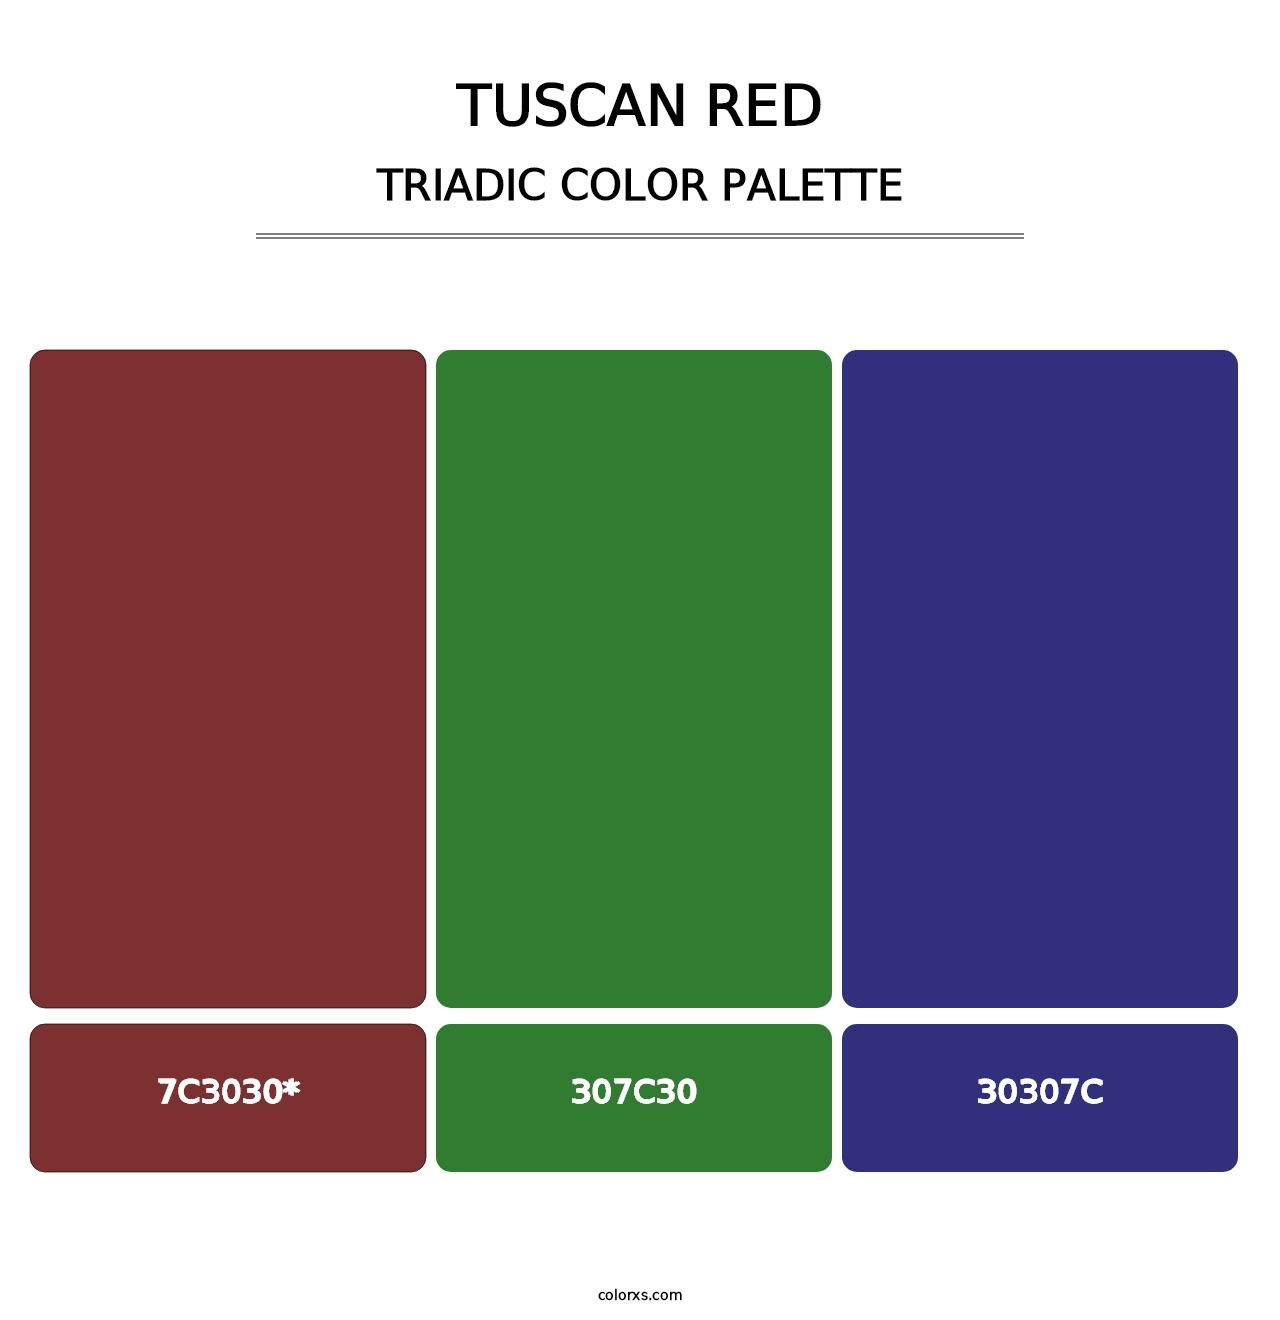 Tuscan Red - Triadic Color Palette